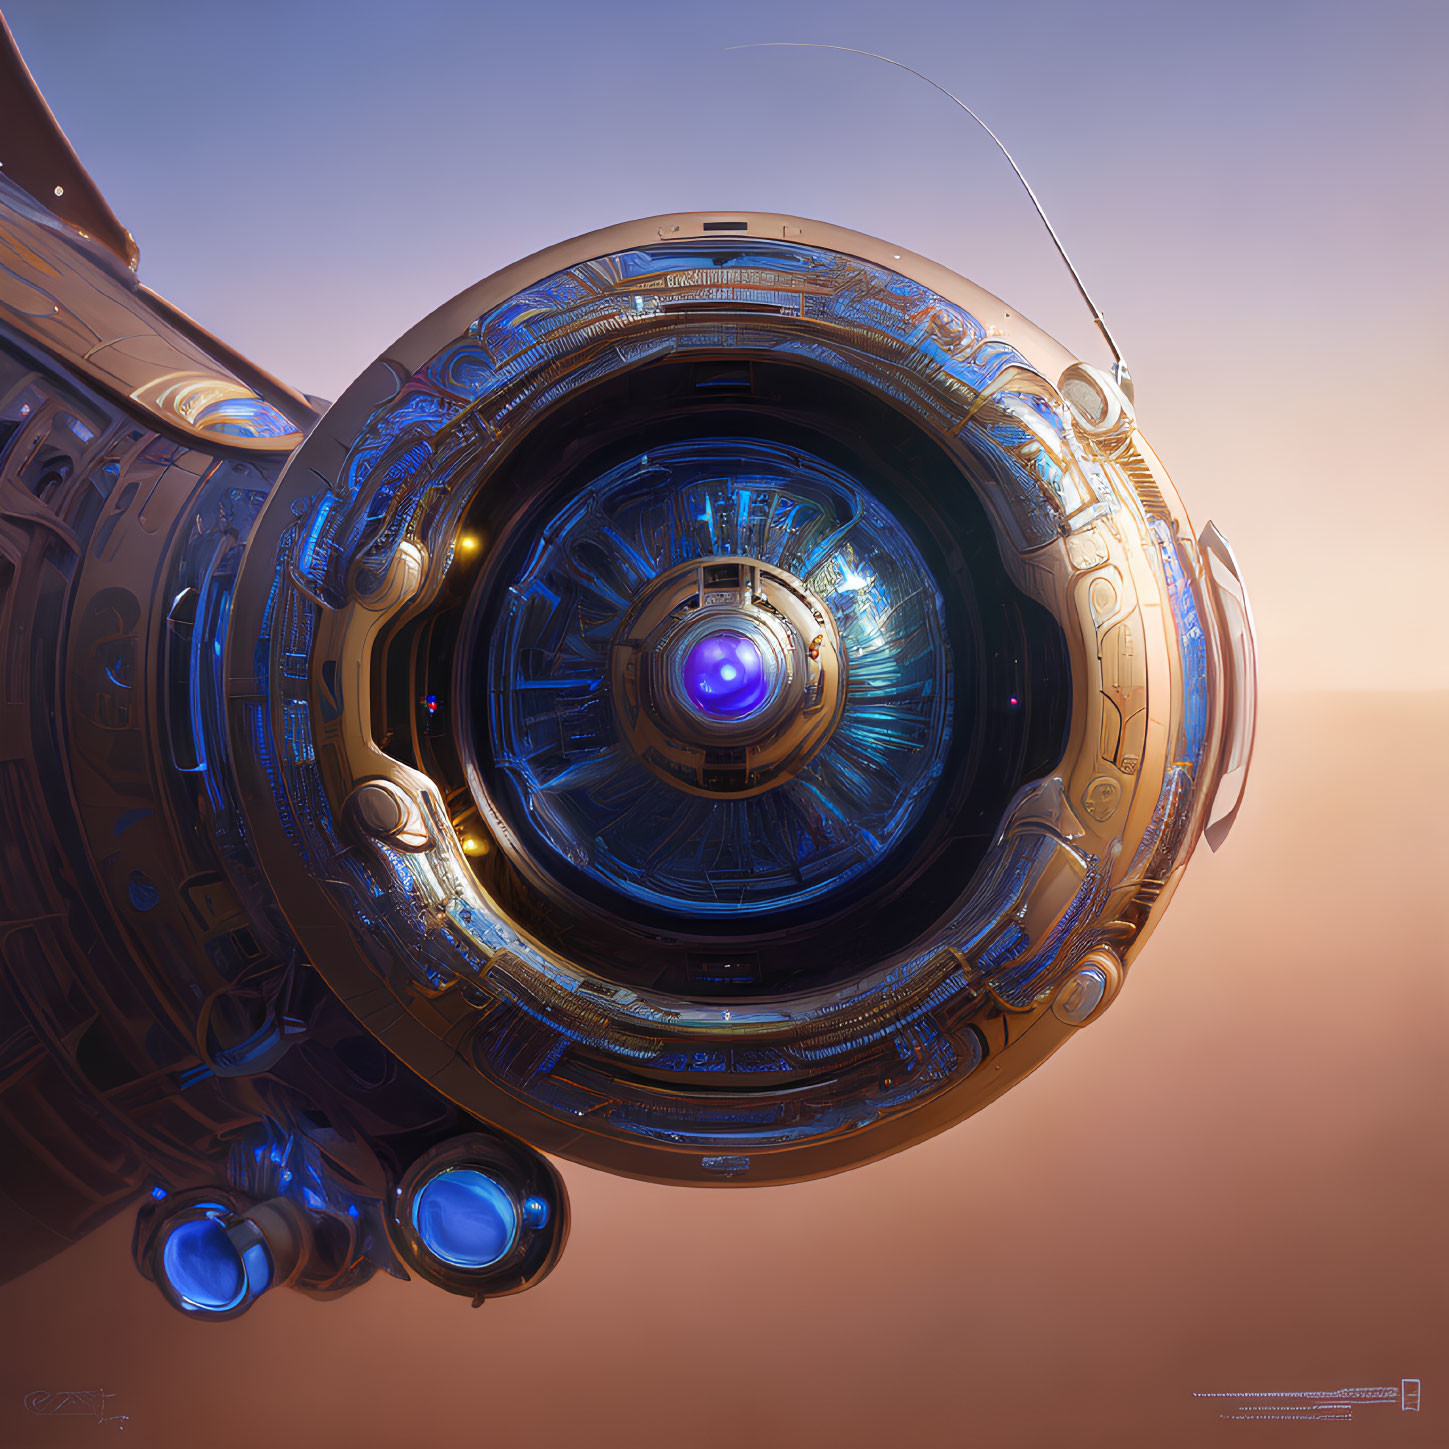 Detailed blue and gold futuristic spaceship above orange planet surface